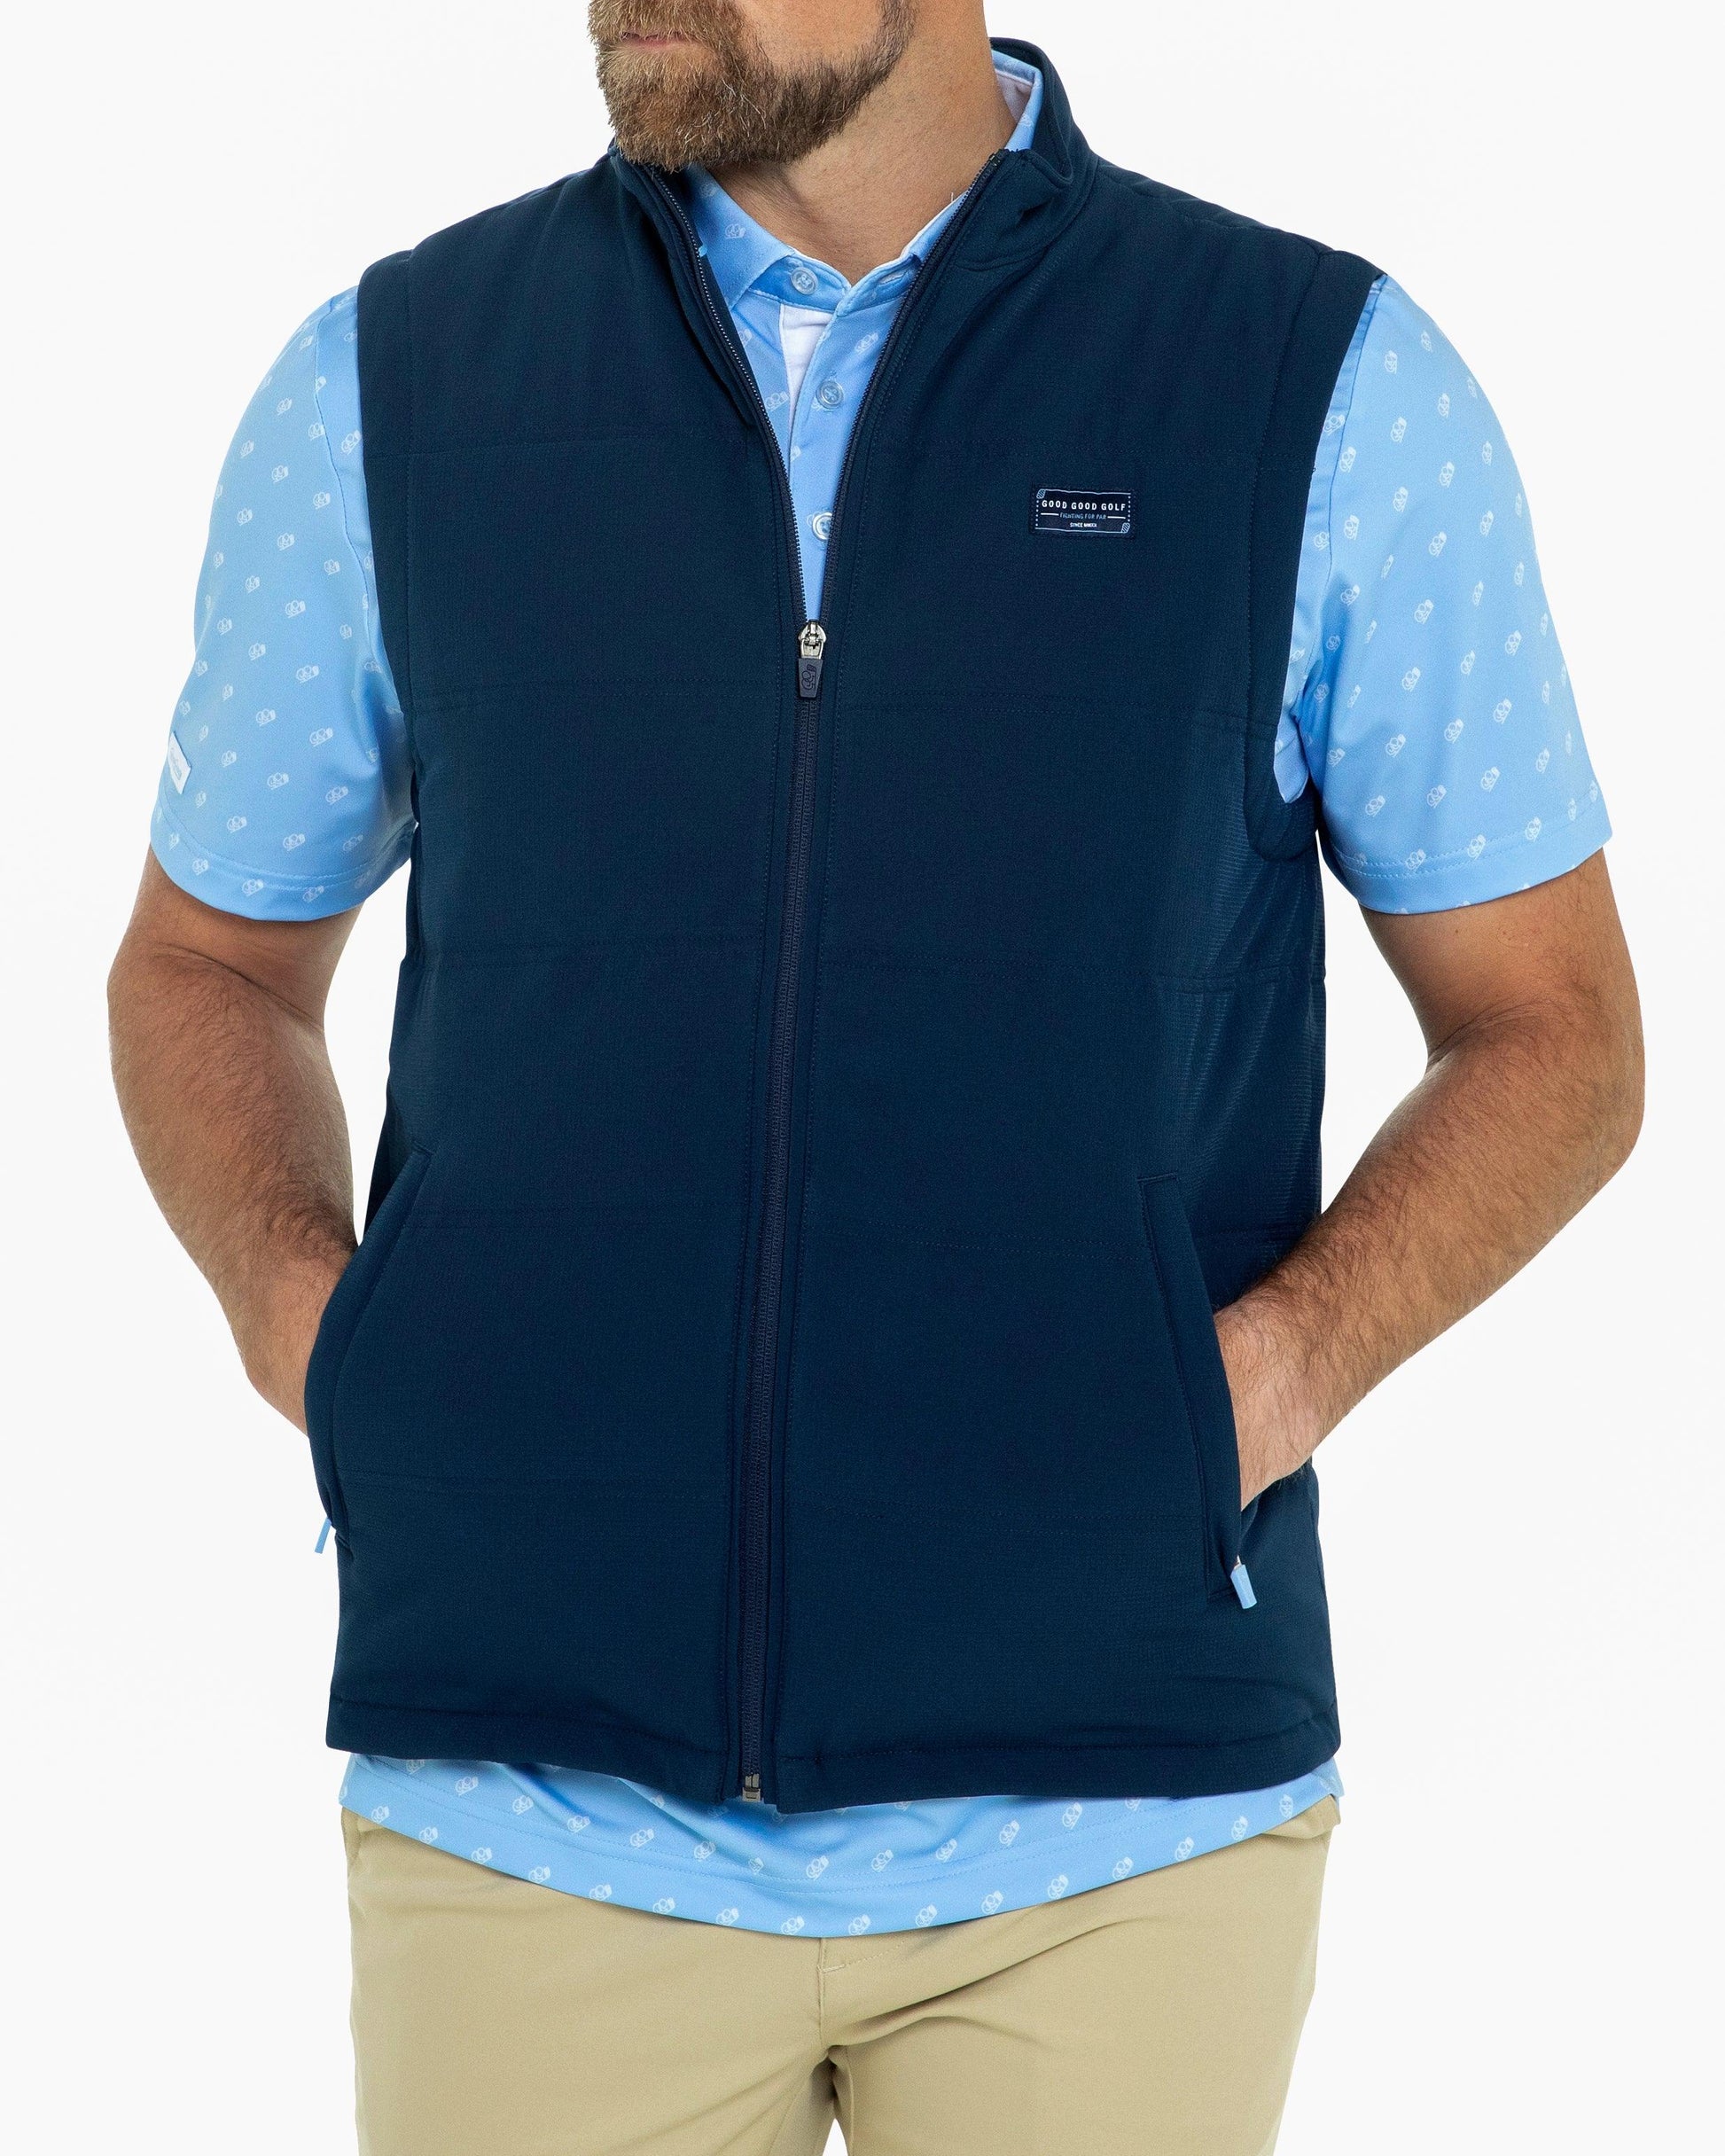 Flyer Quilted Vest - Stay Warm and Comfortable On and Off The